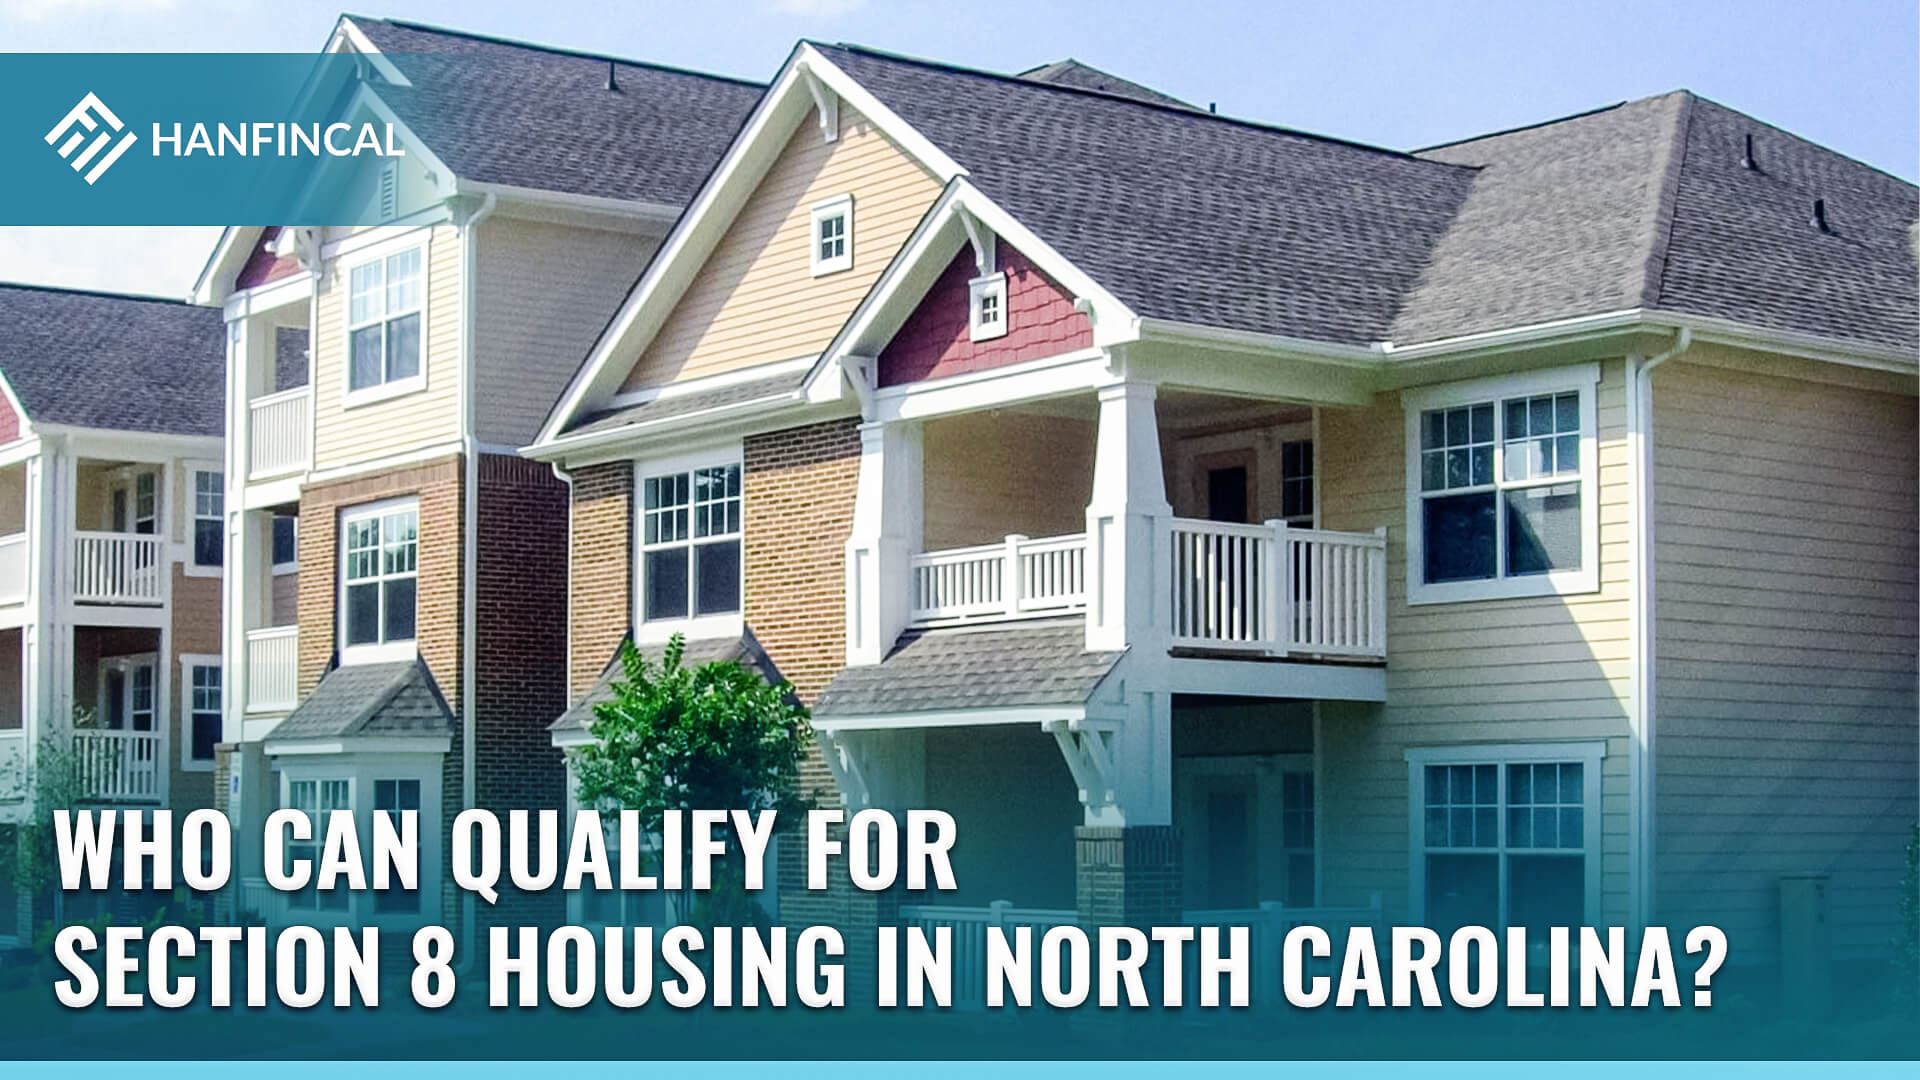 Who can qualify for Section 8 Housing in North Carolina (NC)?